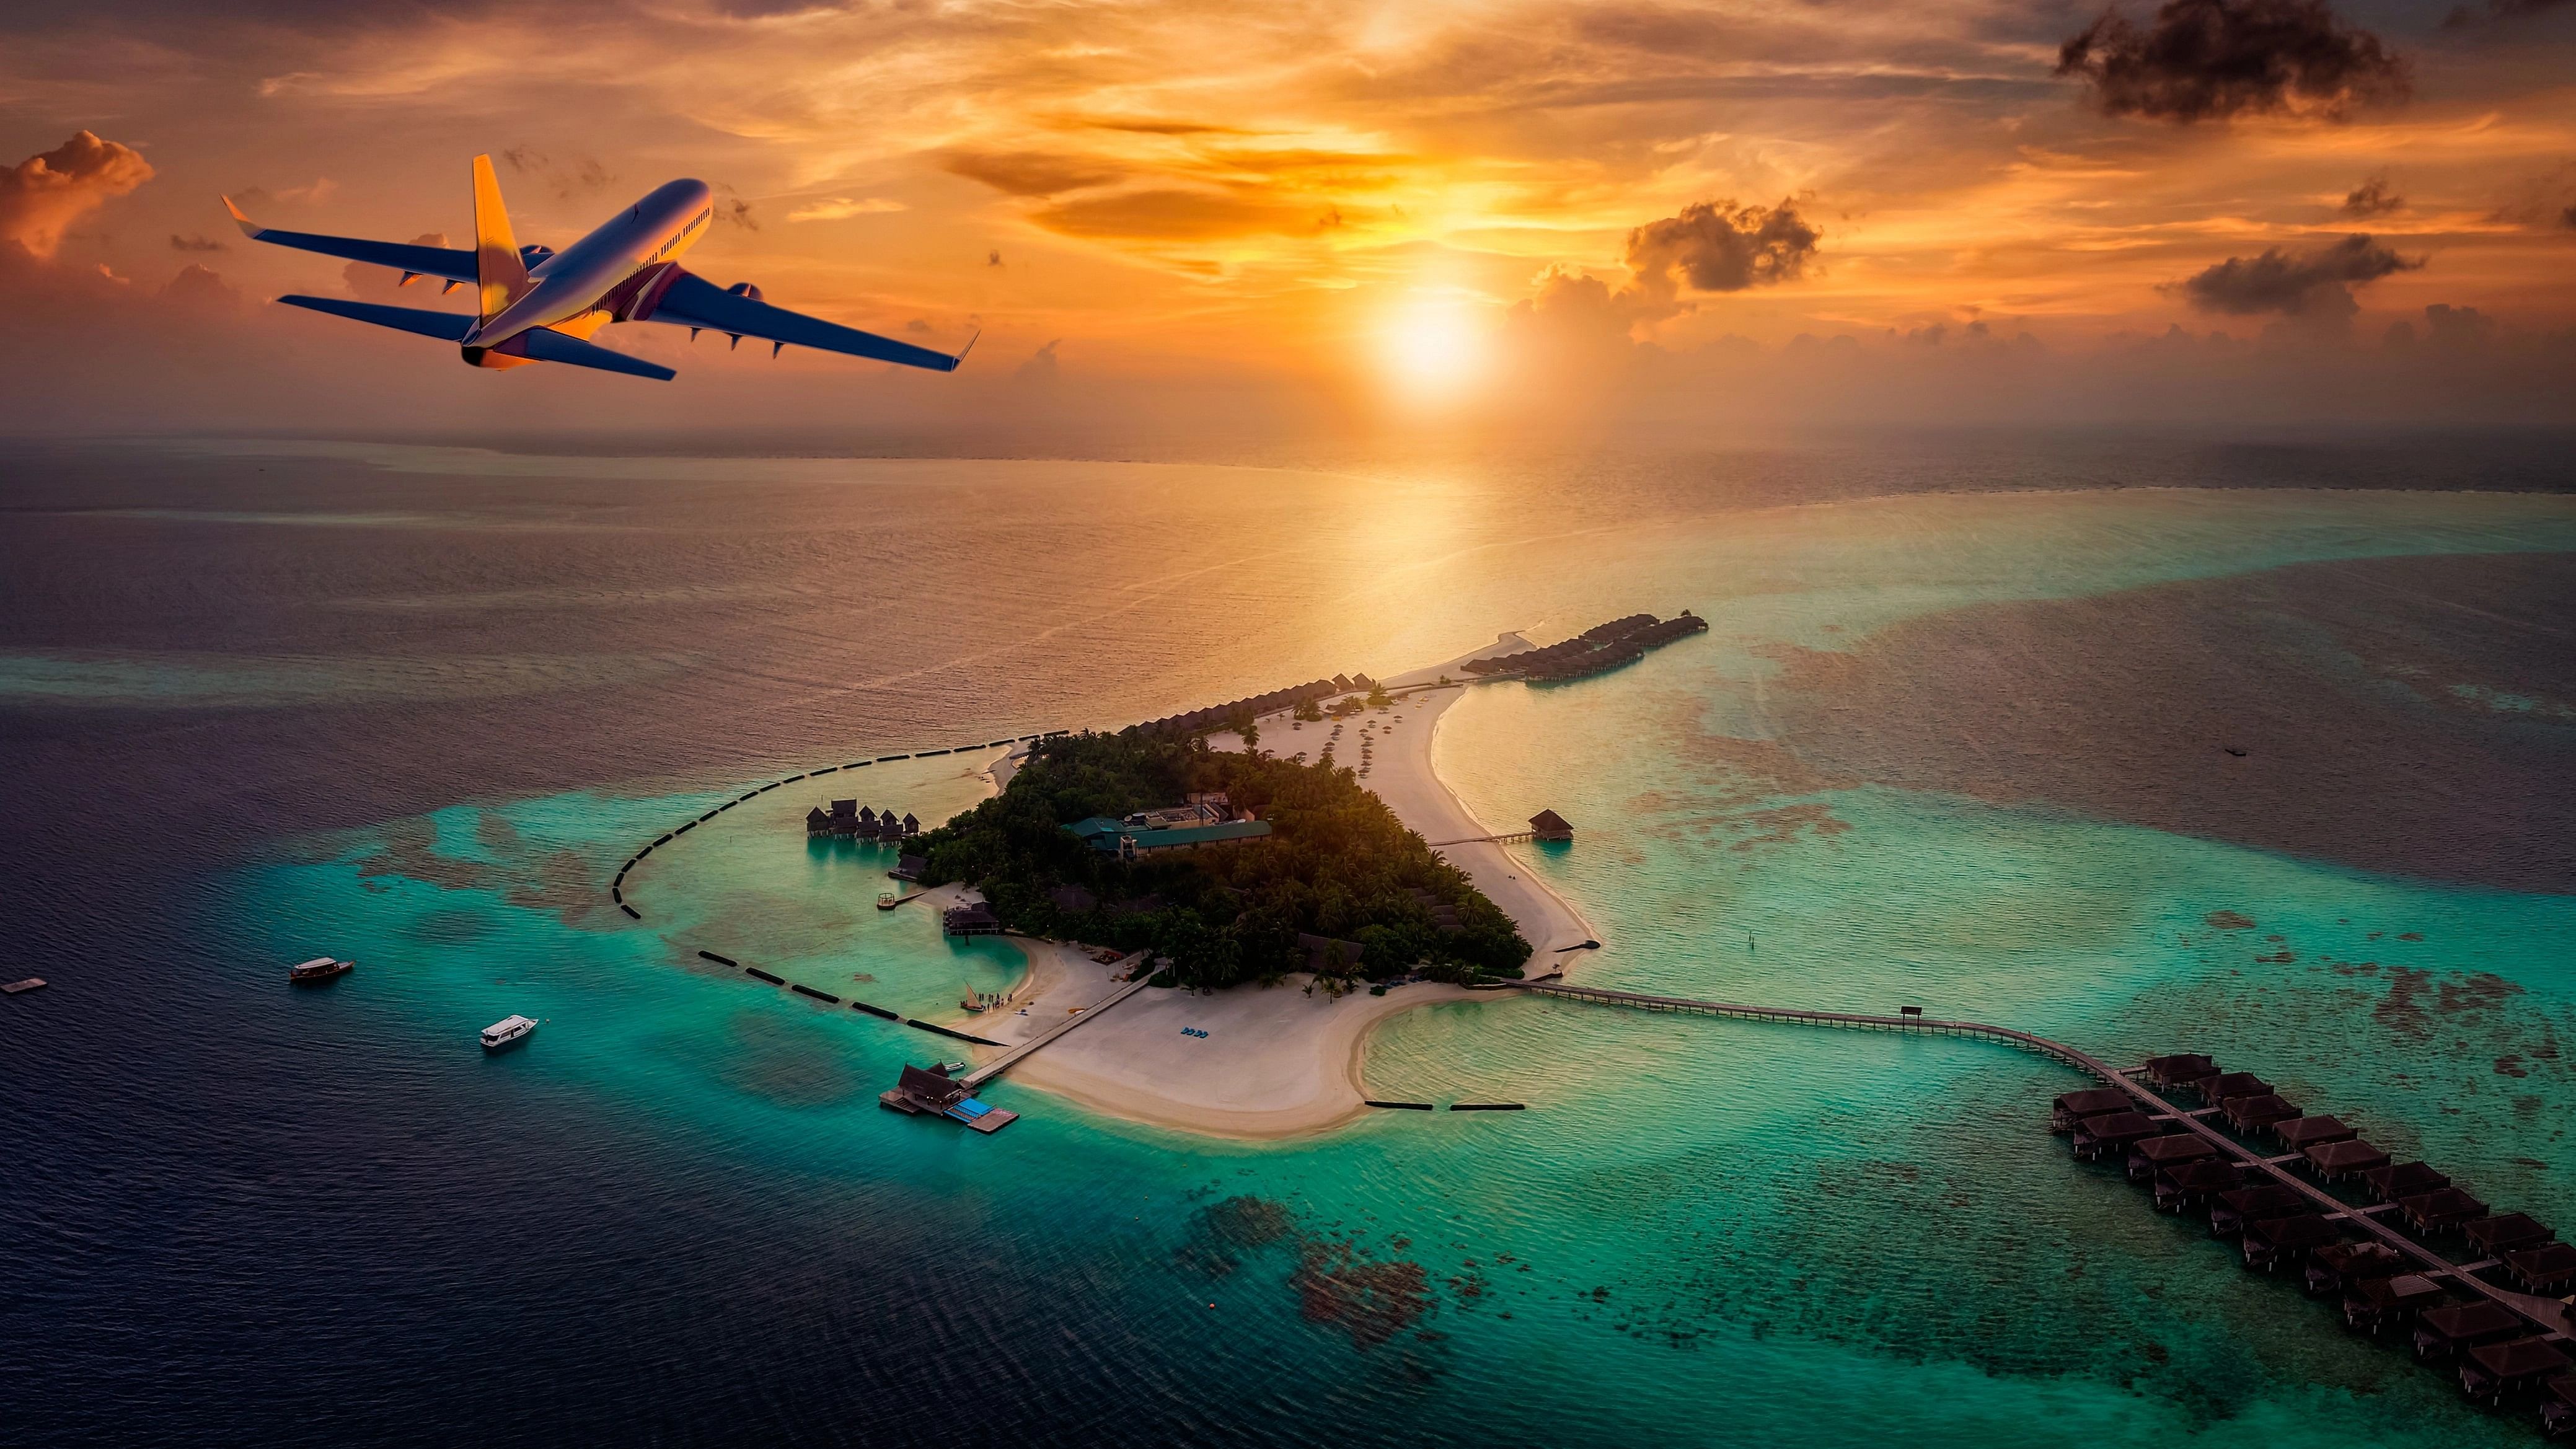 <div class="paragraphs"><p>Representative image showing an airplane approach an island in the Maldives.</p></div>